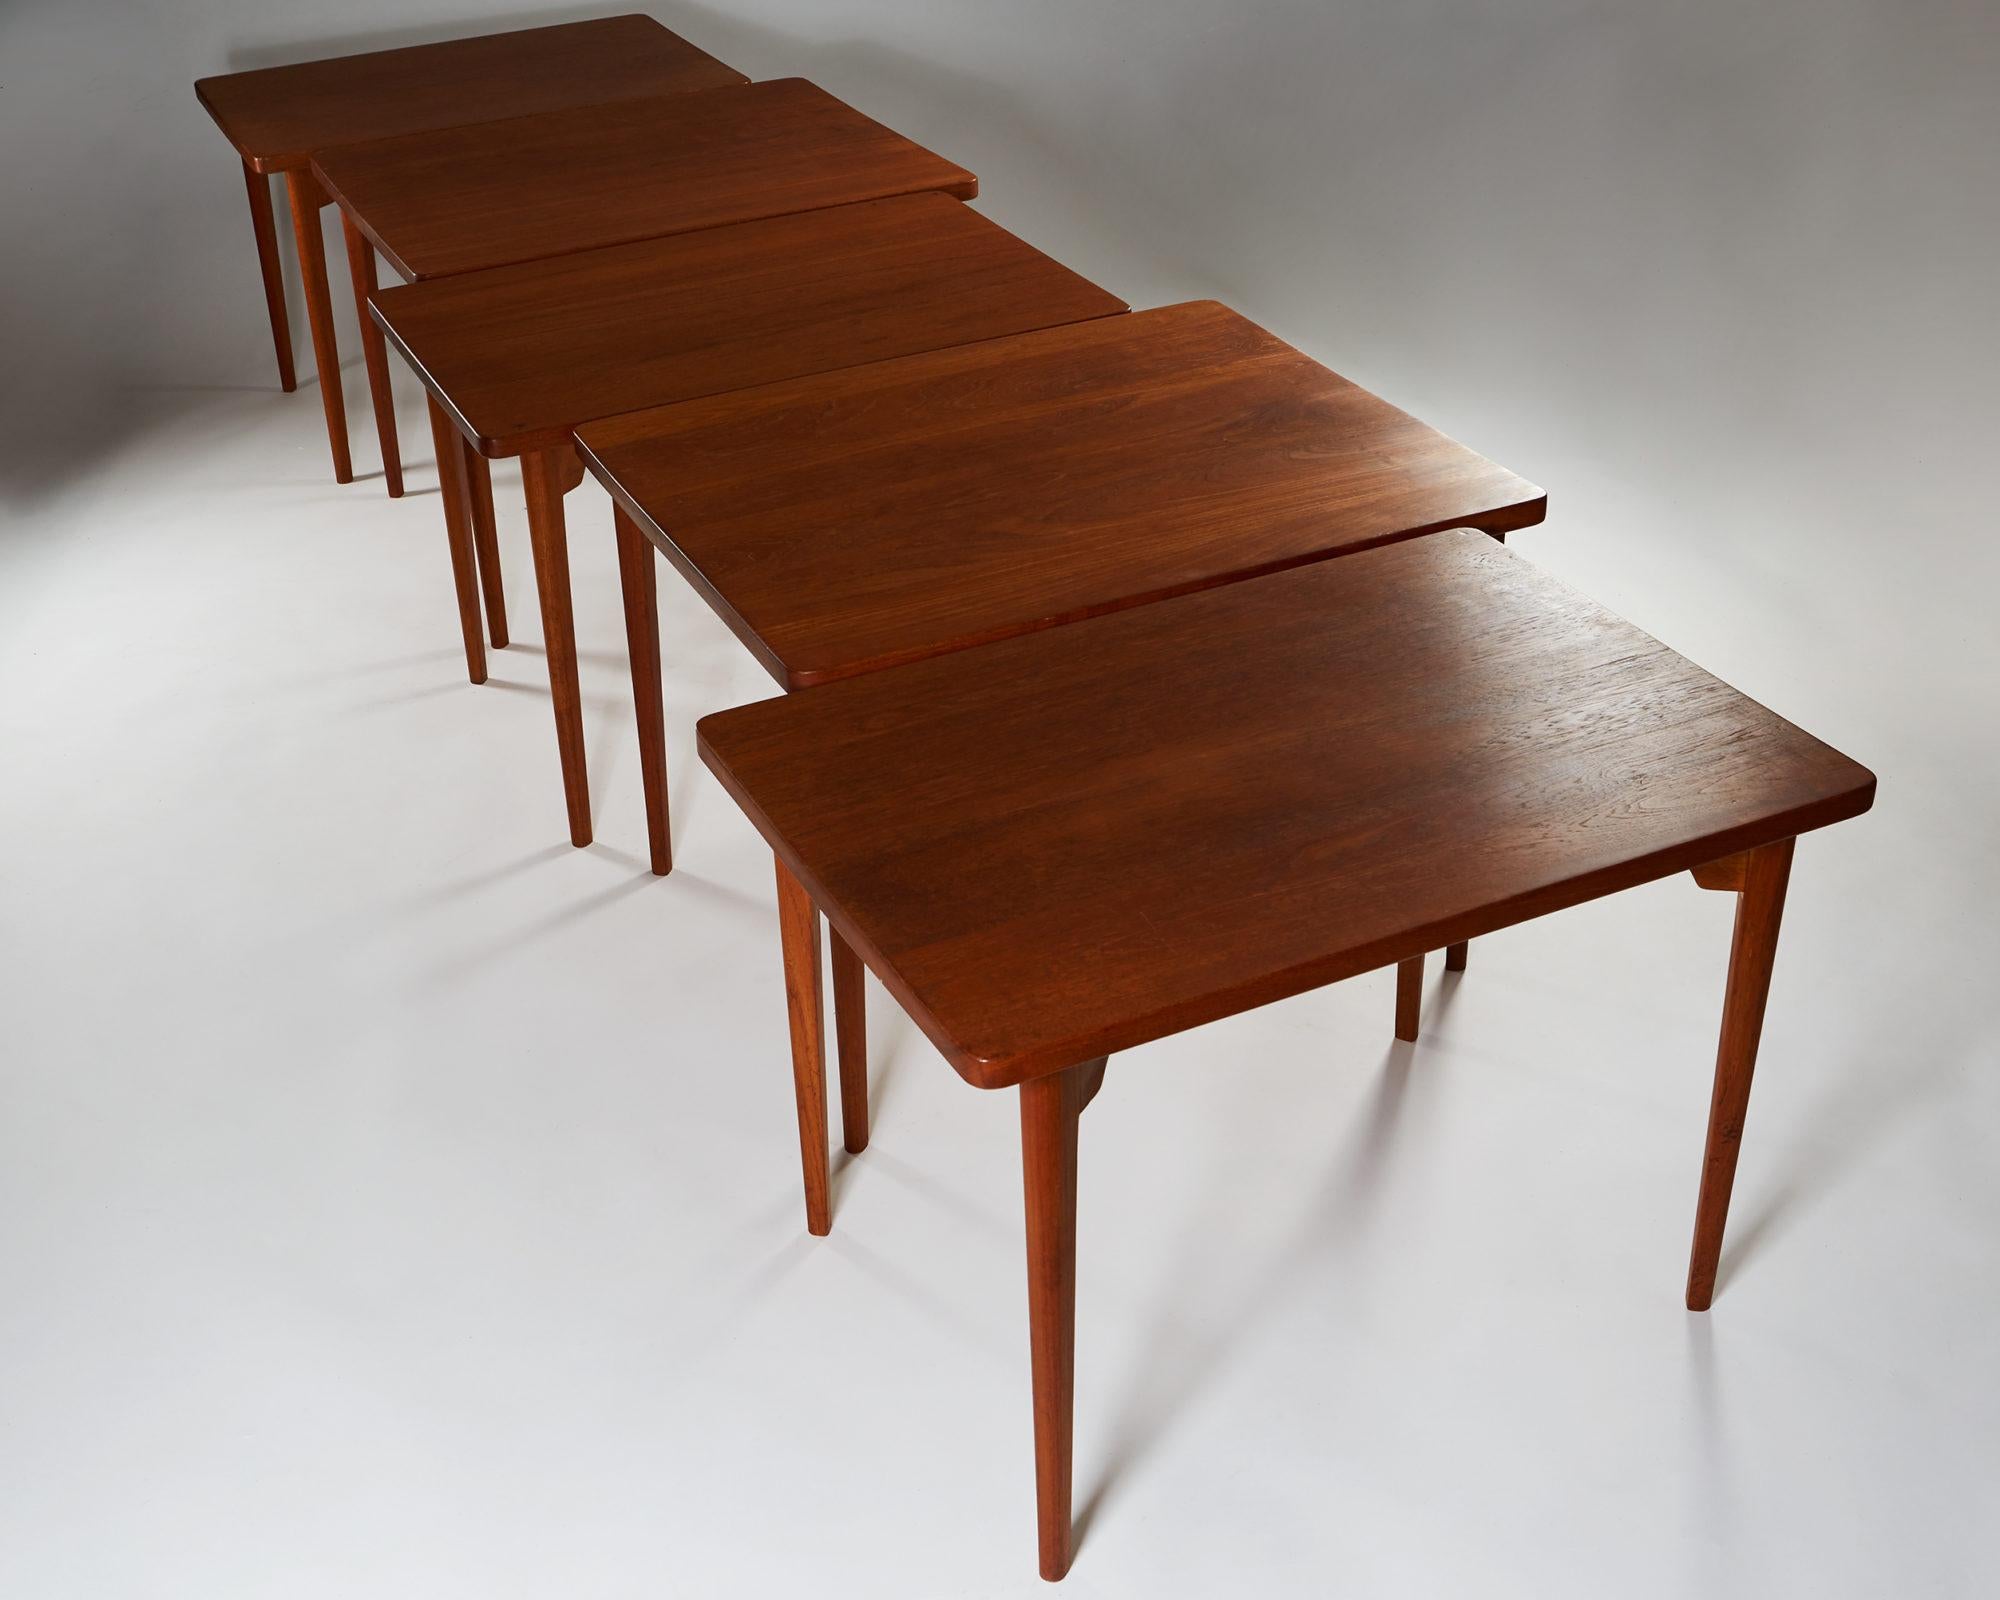 Set of Five Tables Designed by Palle Suenson for J. C. A. Jensen, Denmark, 1930 In Good Condition For Sale In Stockholm, SE